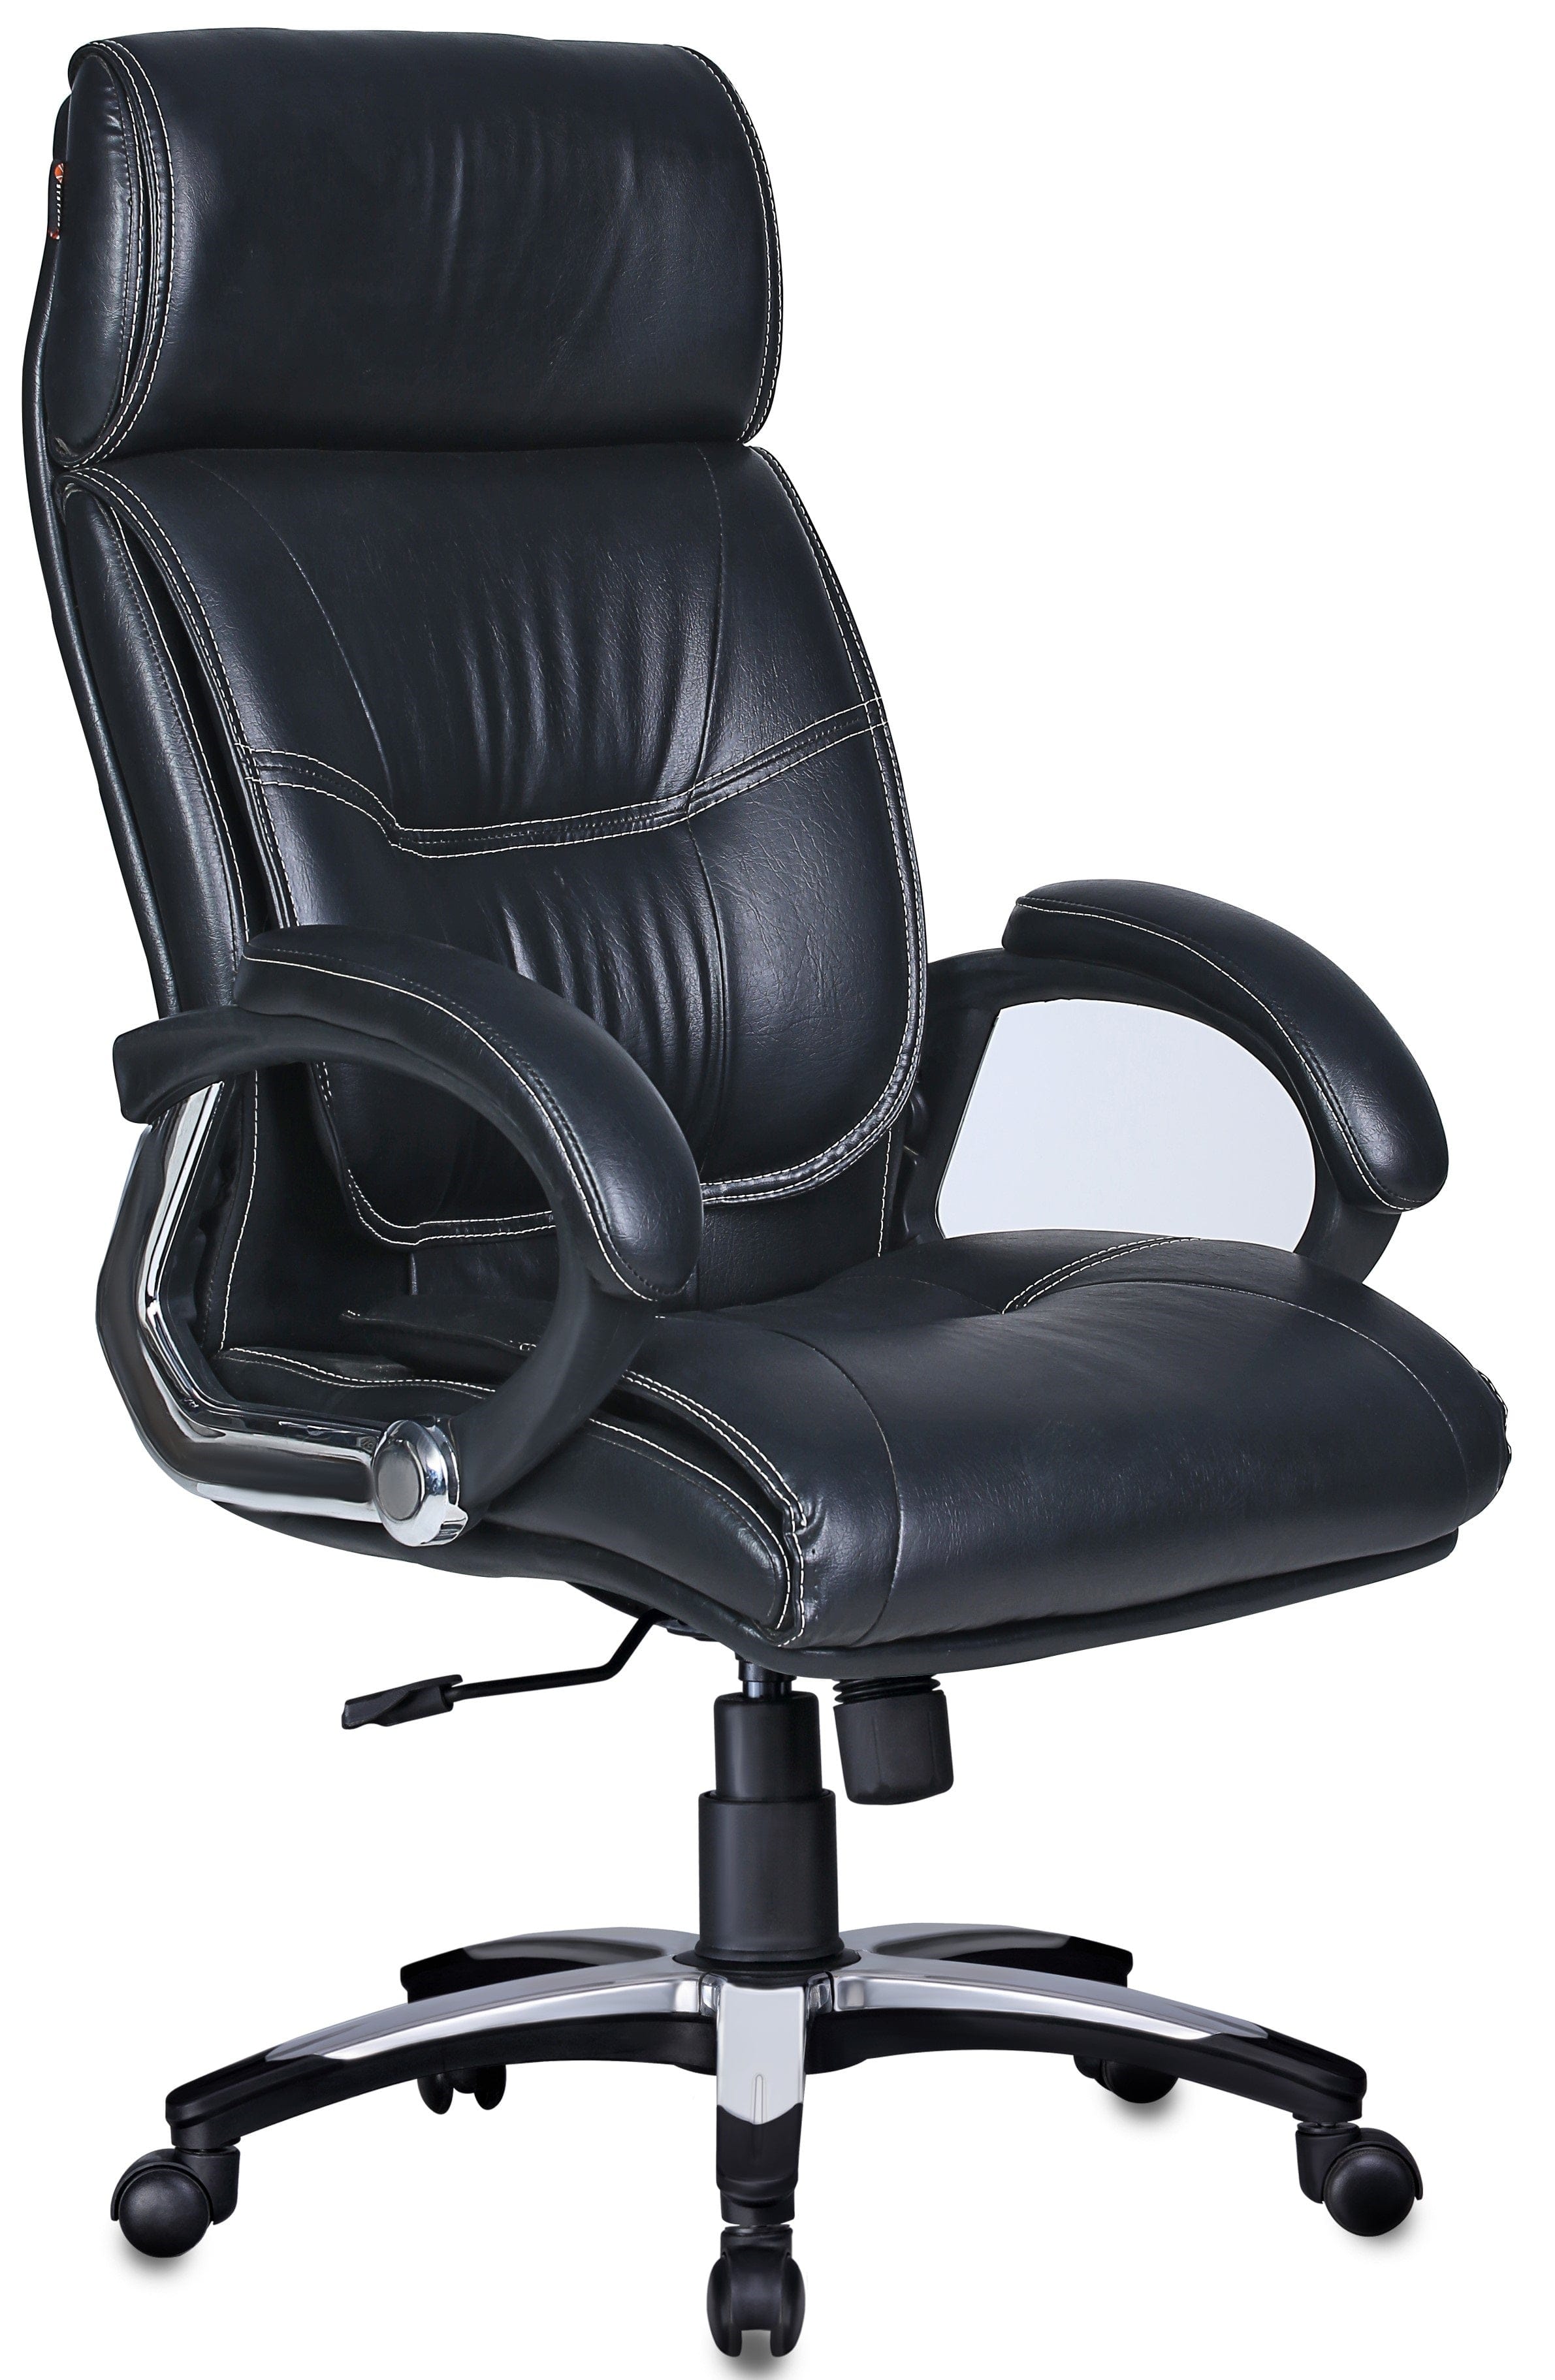 Elegant Executive Chair in Black Colour by Adiko Systems